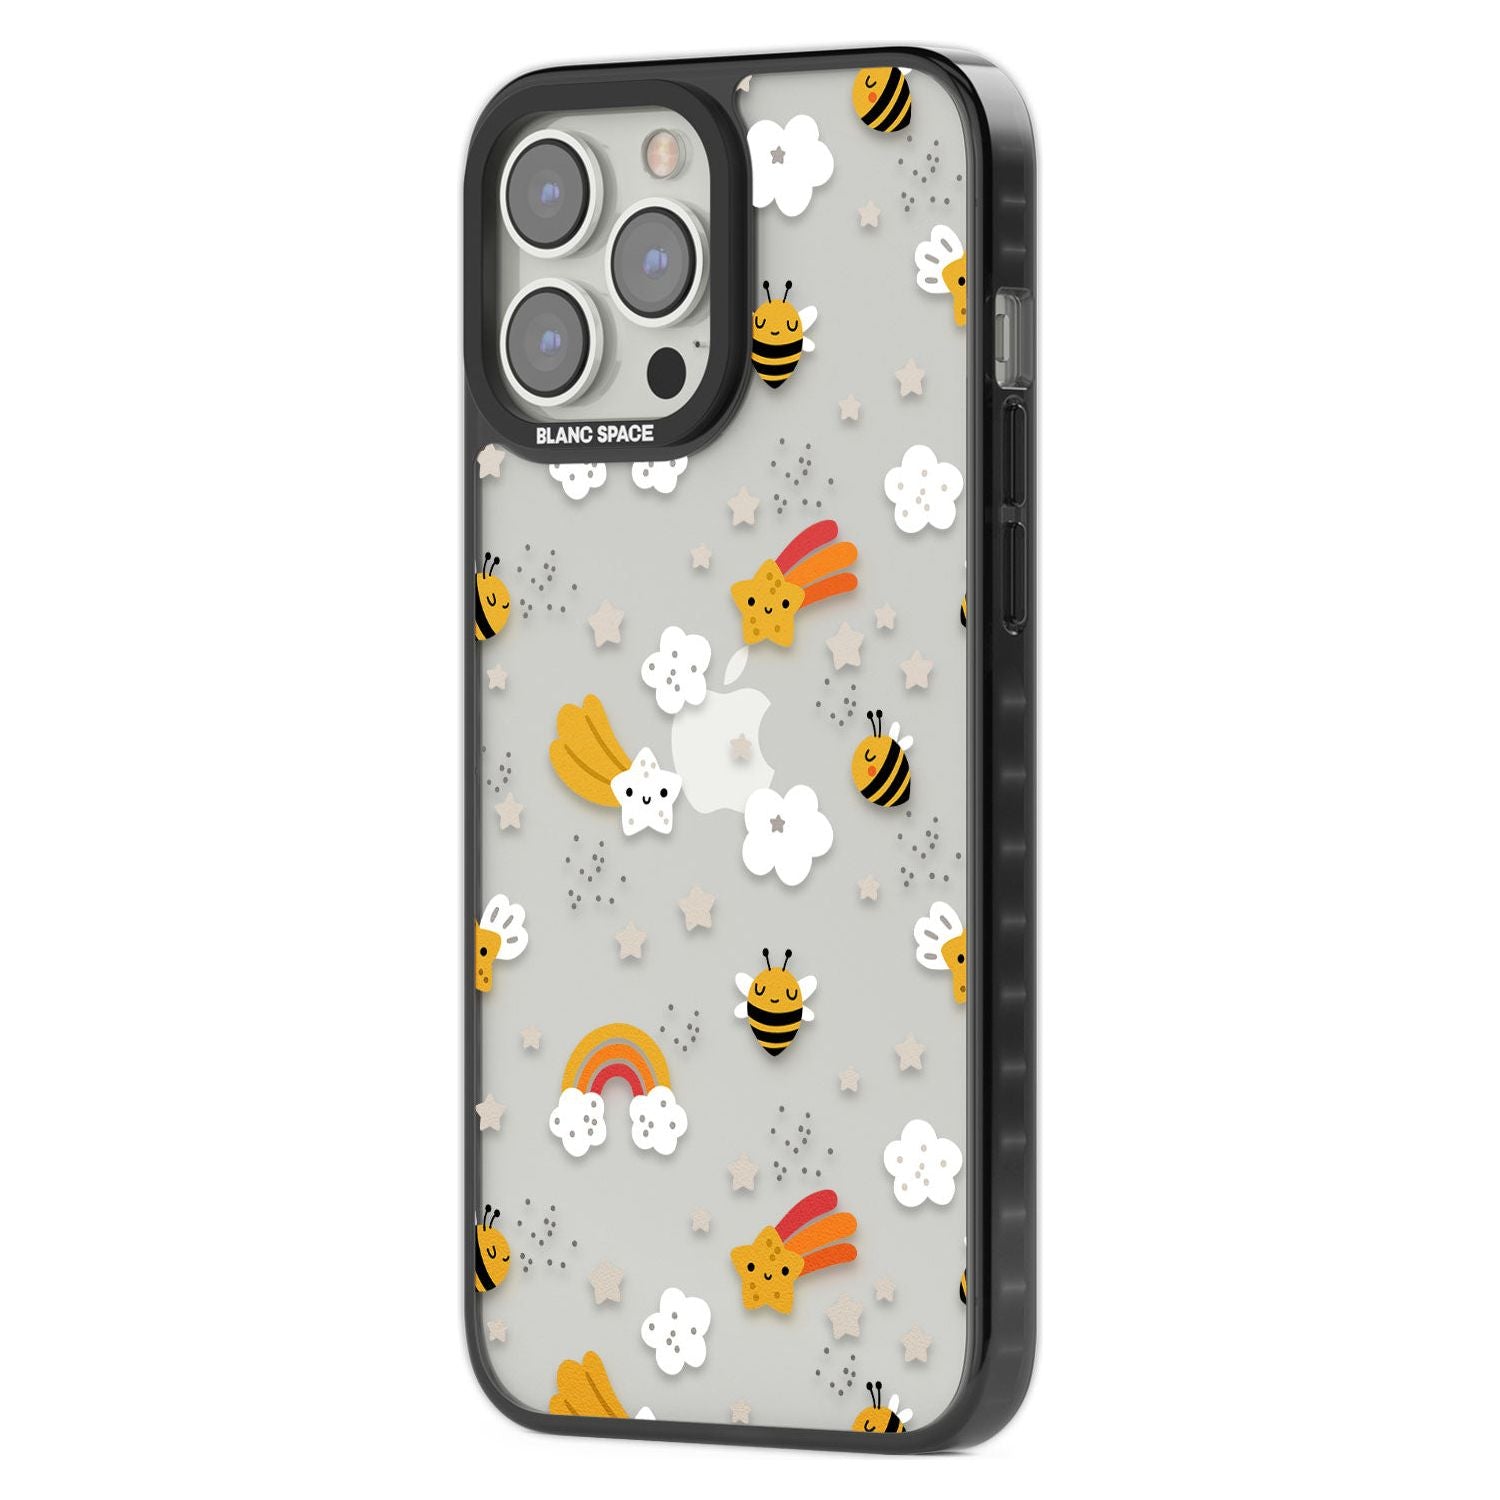 Busy Bee Phone Case iPhone 15 Pro Max / Black Impact Case,iPhone 15 Plus / Black Impact Case,iPhone 15 Pro / Black Impact Case,iPhone 15 / Black Impact Case,iPhone 15 Pro Max / Impact Case,iPhone 15 Plus / Impact Case,iPhone 15 Pro / Impact Case,iPhone 15 / Impact Case,iPhone 15 Pro Max / Magsafe Black Impact Case,iPhone 15 Plus / Magsafe Black Impact Case,iPhone 15 Pro / Magsafe Black Impact Case,iPhone 15 / Magsafe Black Impact Case,iPhone 14 Pro Max / Black Impact Case,iPhone 14 Plus / Black Impact Case,